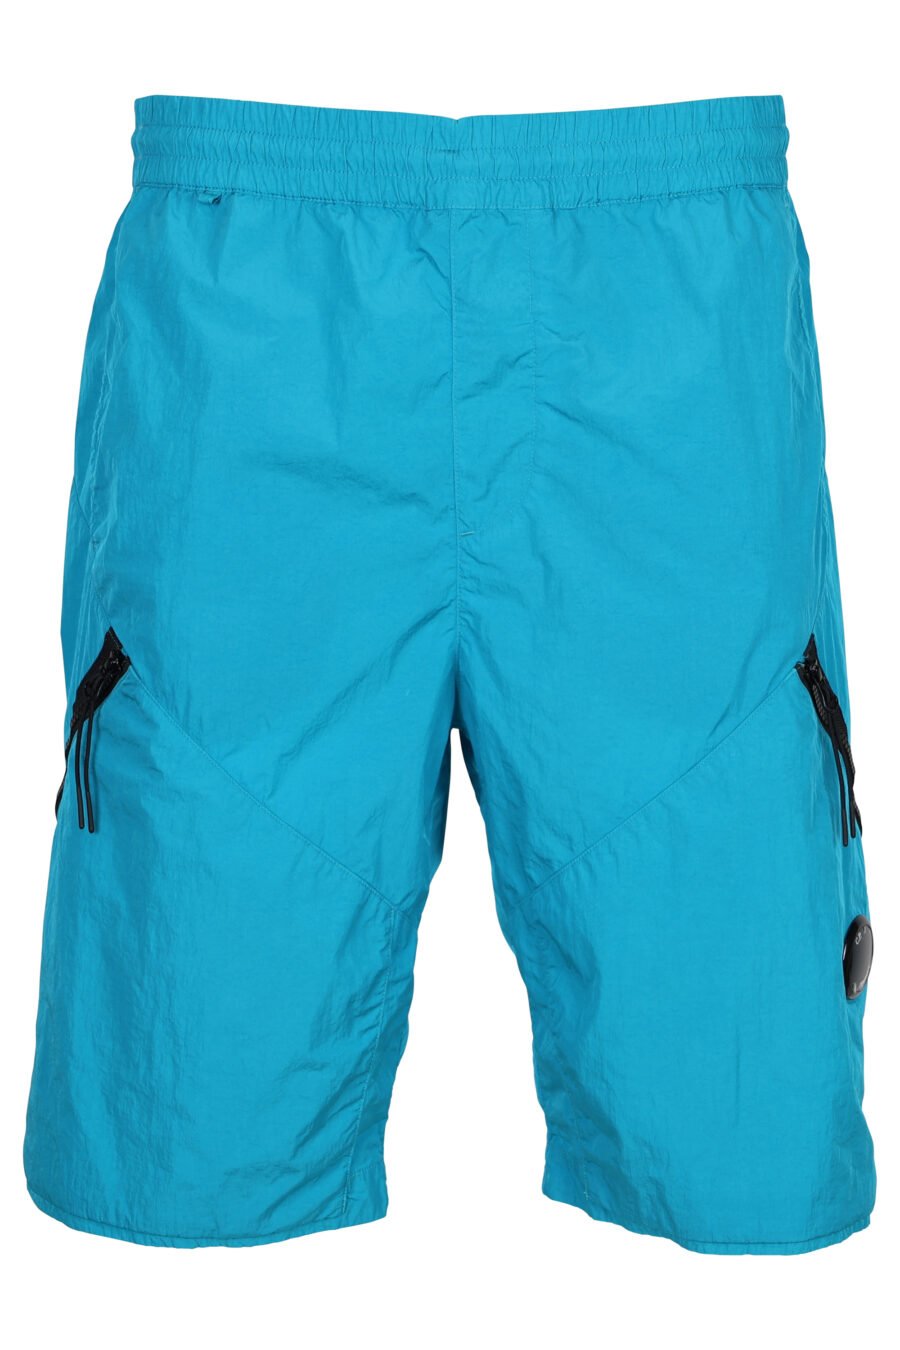 Turquoise blue shorts with diagonal zip and lens logo - 7620943384529